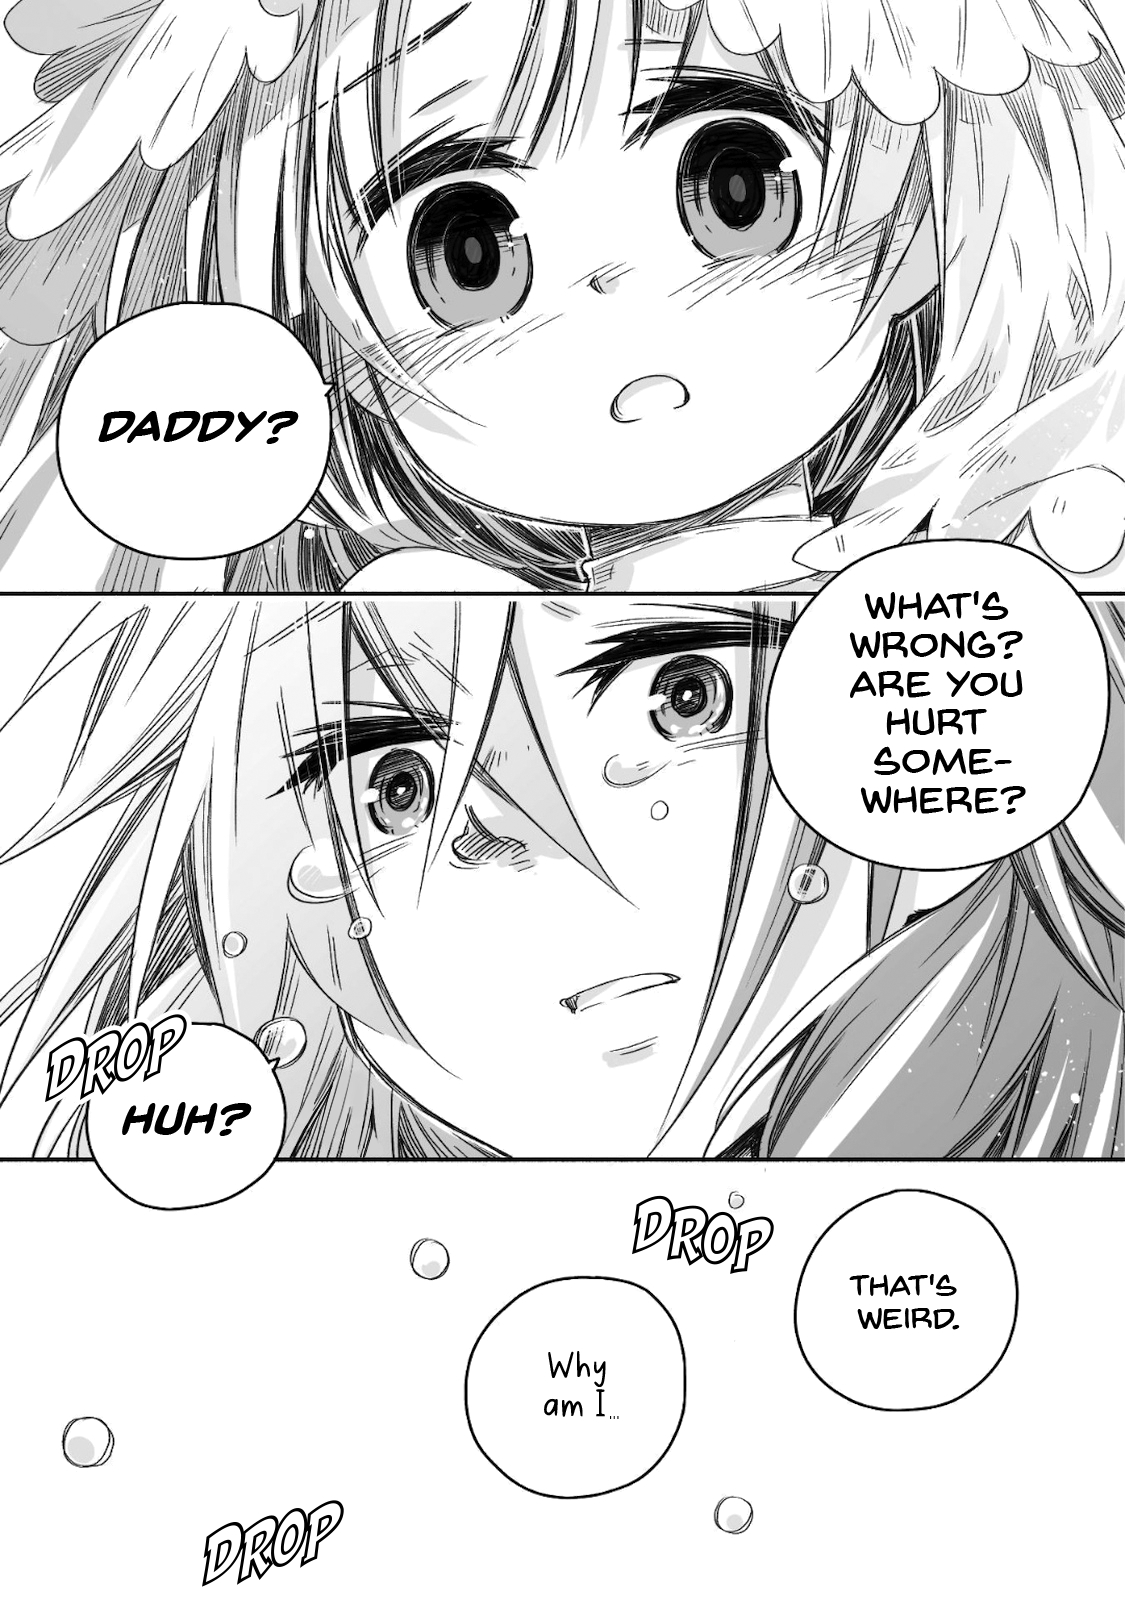 Parenting Diary Of The Strongest Dragon Who Suddenly Became A Dad ～ Cute Daughter, Heartwarming And Growing Up To Be The Strongest In The Human World ～ - 6 page 22